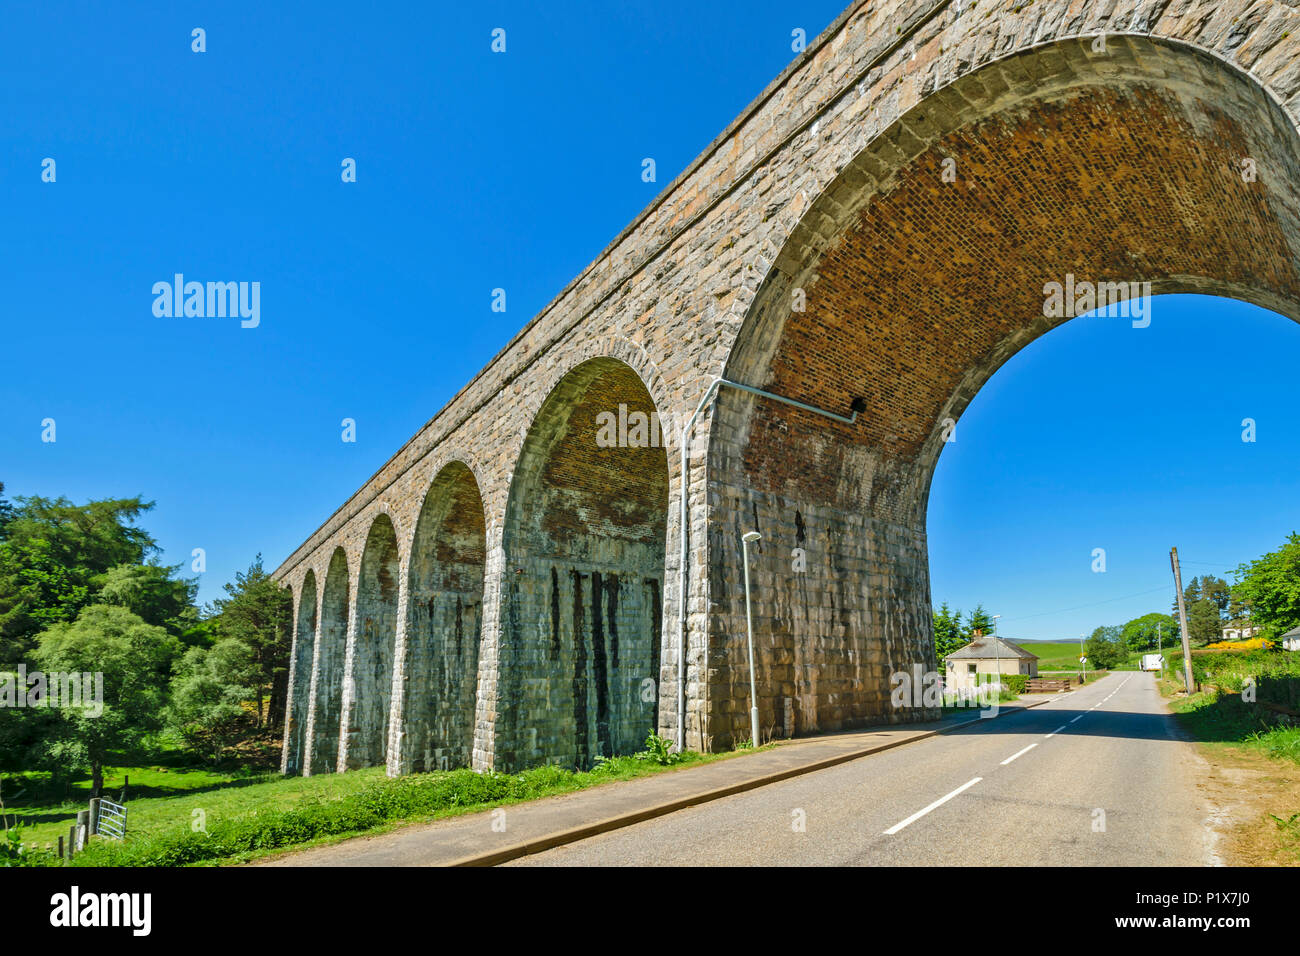 TOMATIN STONE RAILWAY VIADUCT WITH LARGE ARCHWAY OVER THE ROAD Stock Photo